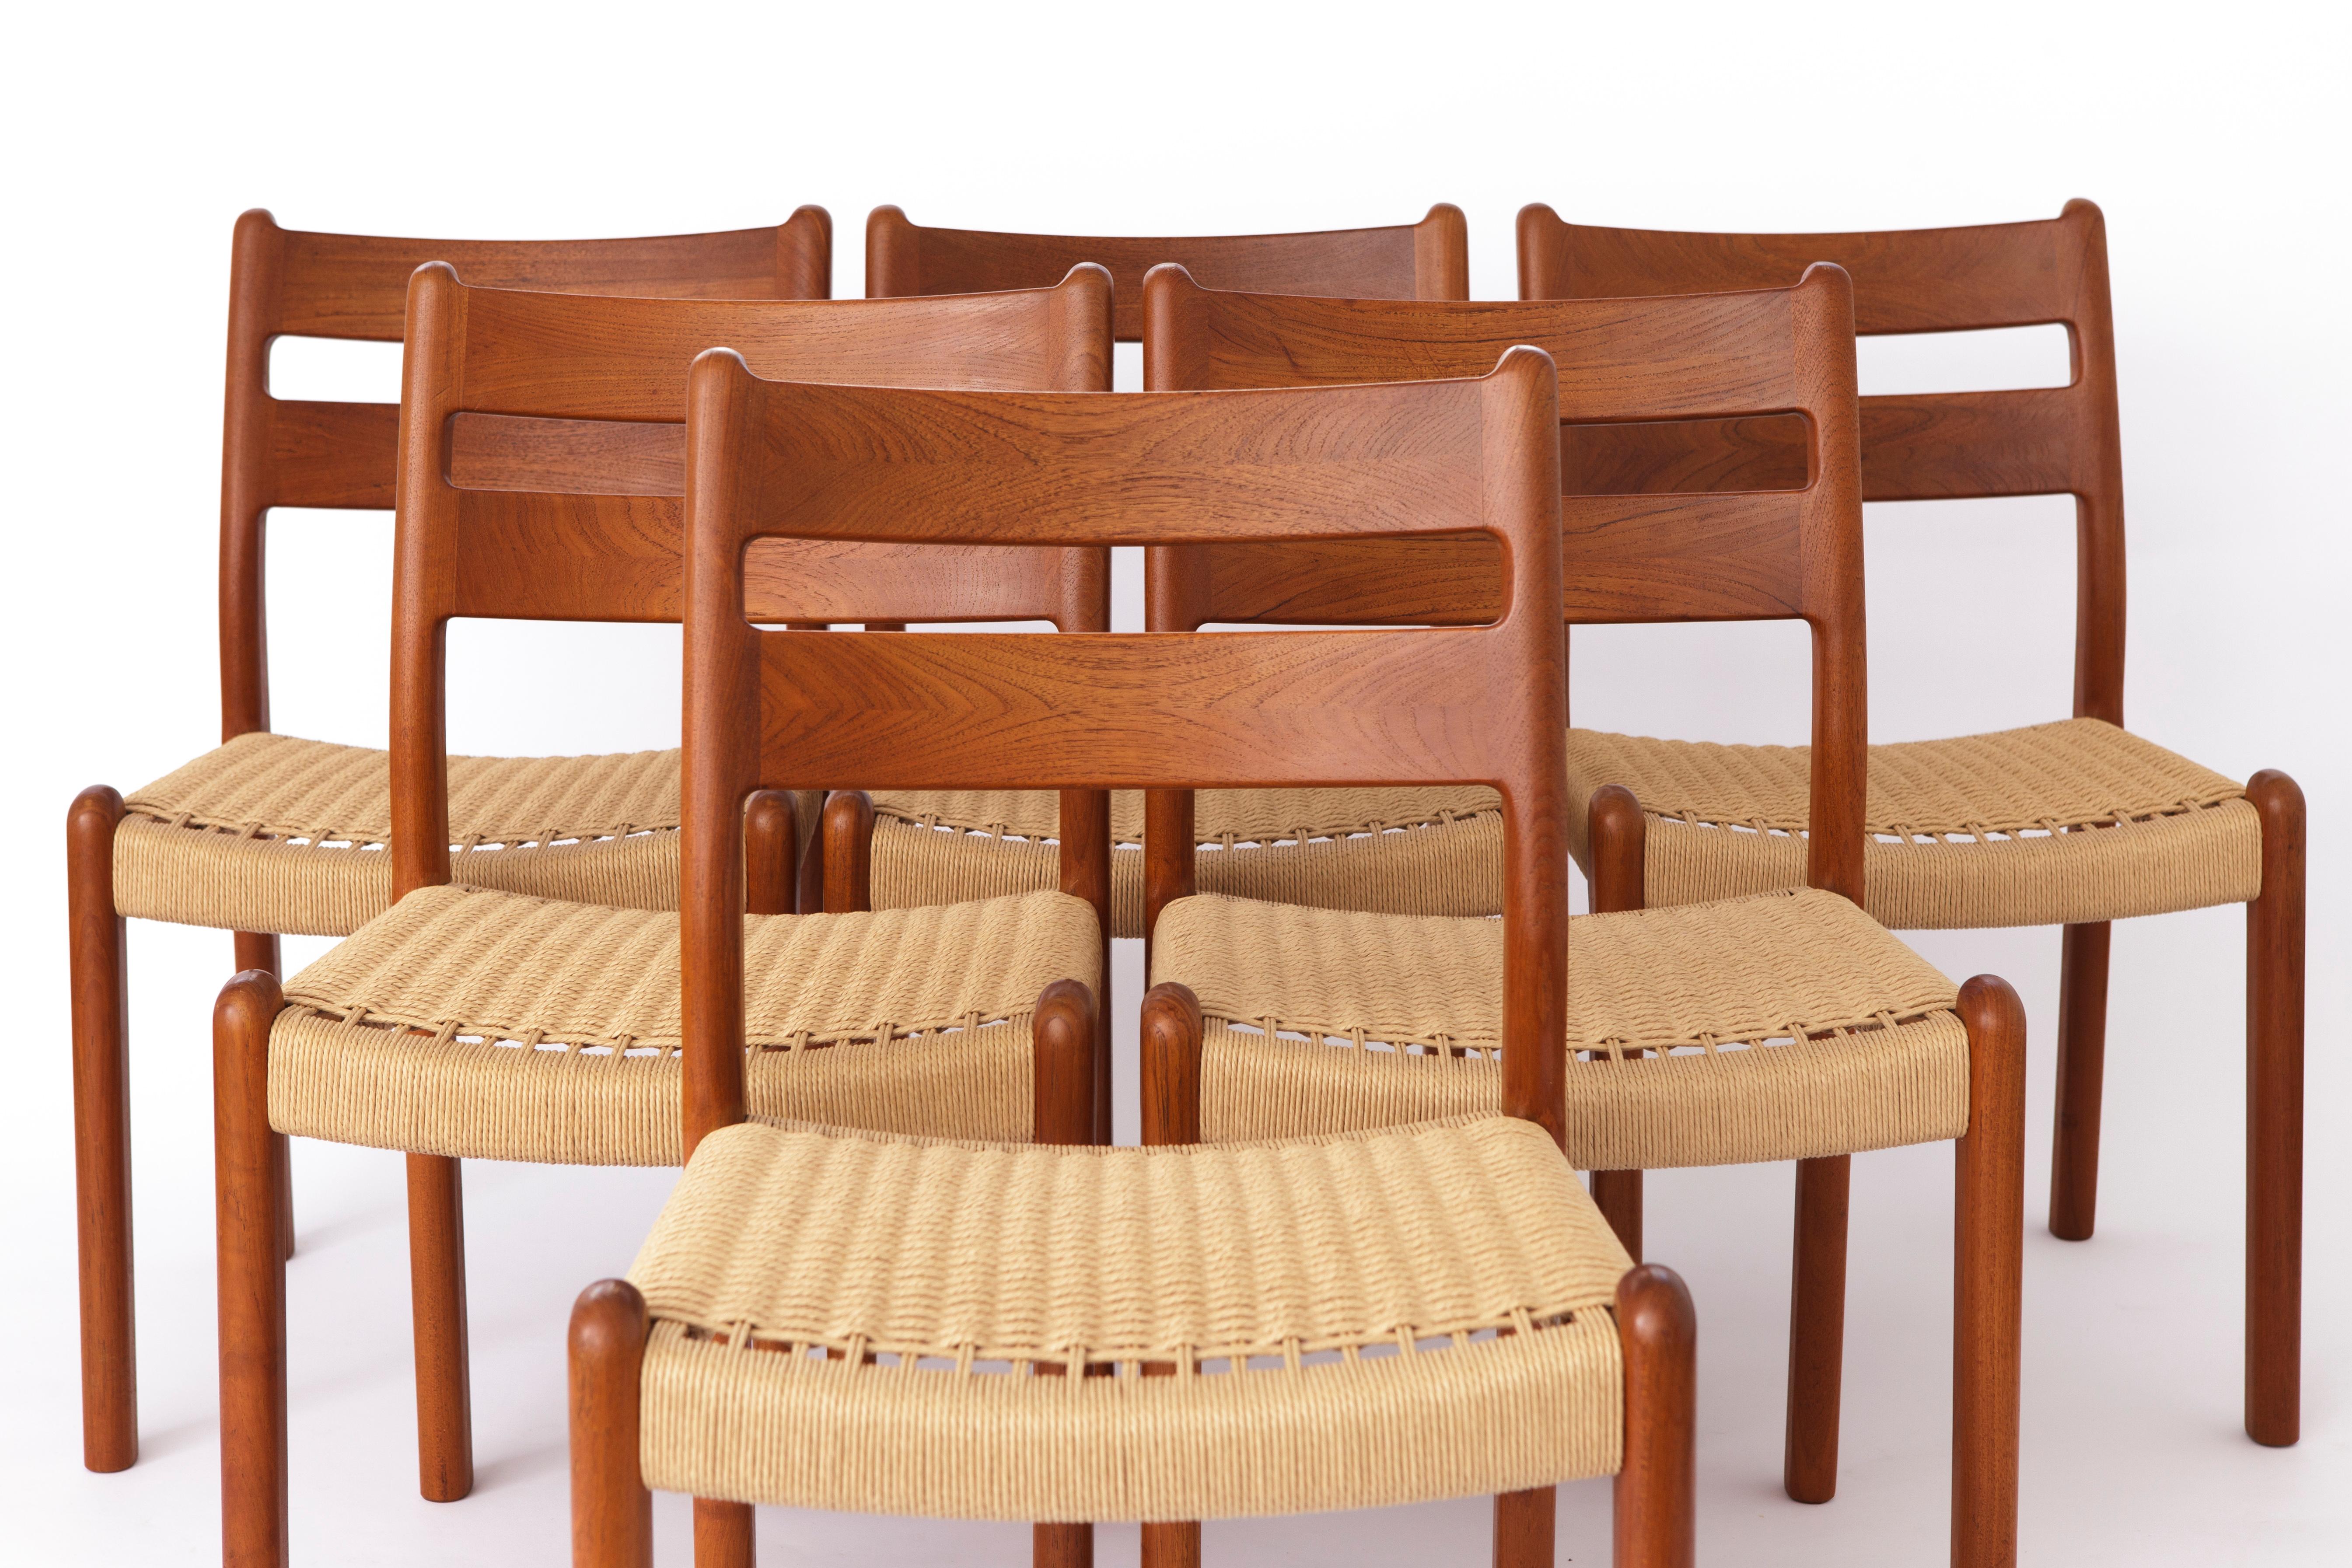 Massive teak chairs from the Danish manufacturer EMC Mobler. 
Production period: 1960s-1970s. 
Displayed price is for 6 chairs. 

Very good condition. Solid teak frames. Stable stand. 
No wobbling corner connections. Renewed seat weavings on